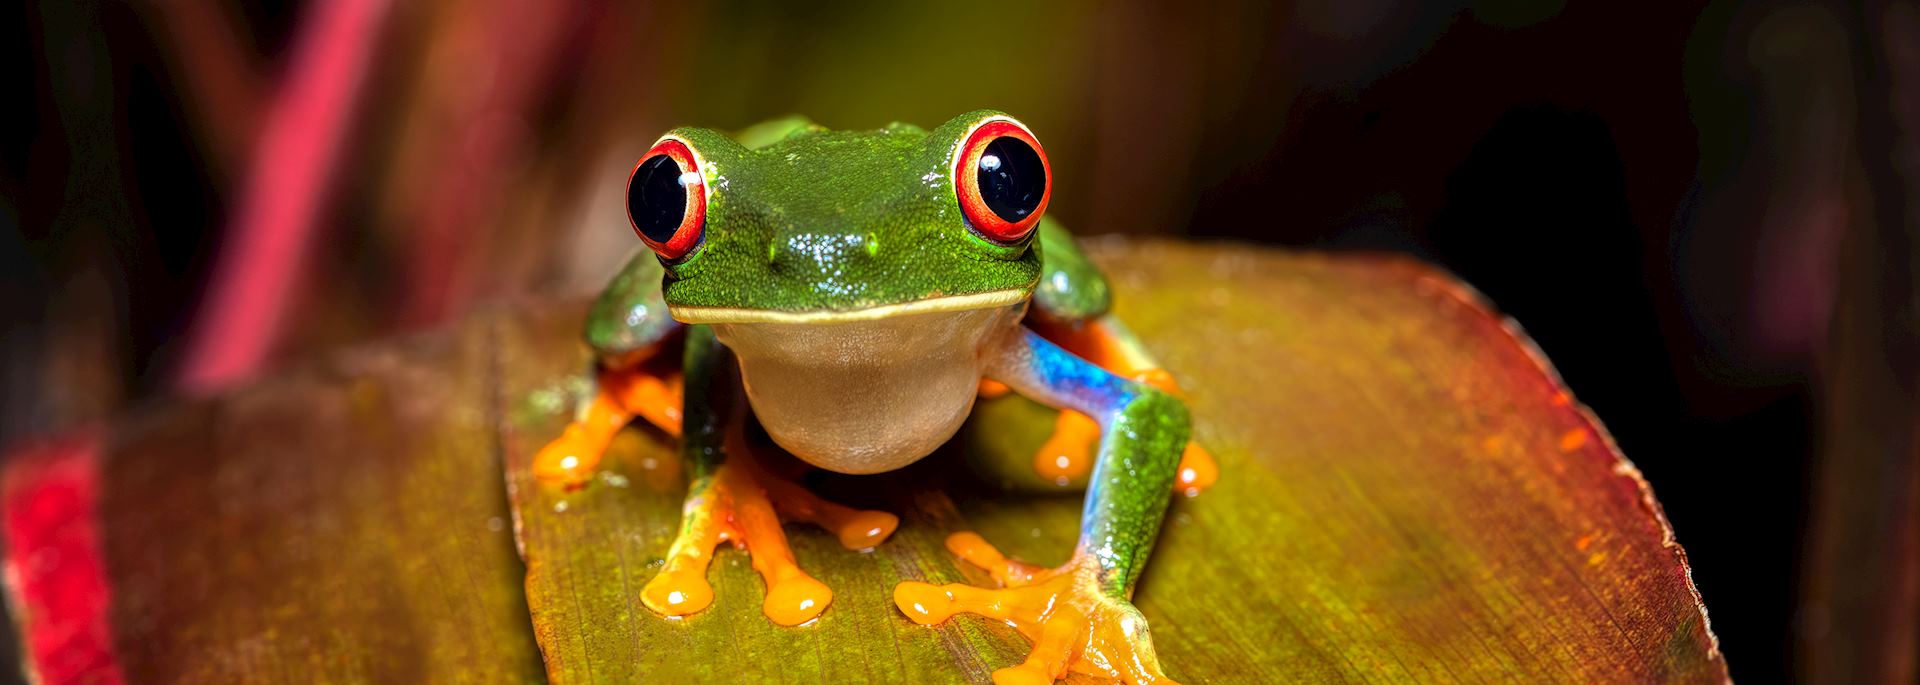 Red-eyed tree frog, Caño Negro Wildlife Reserve, Costa Rica